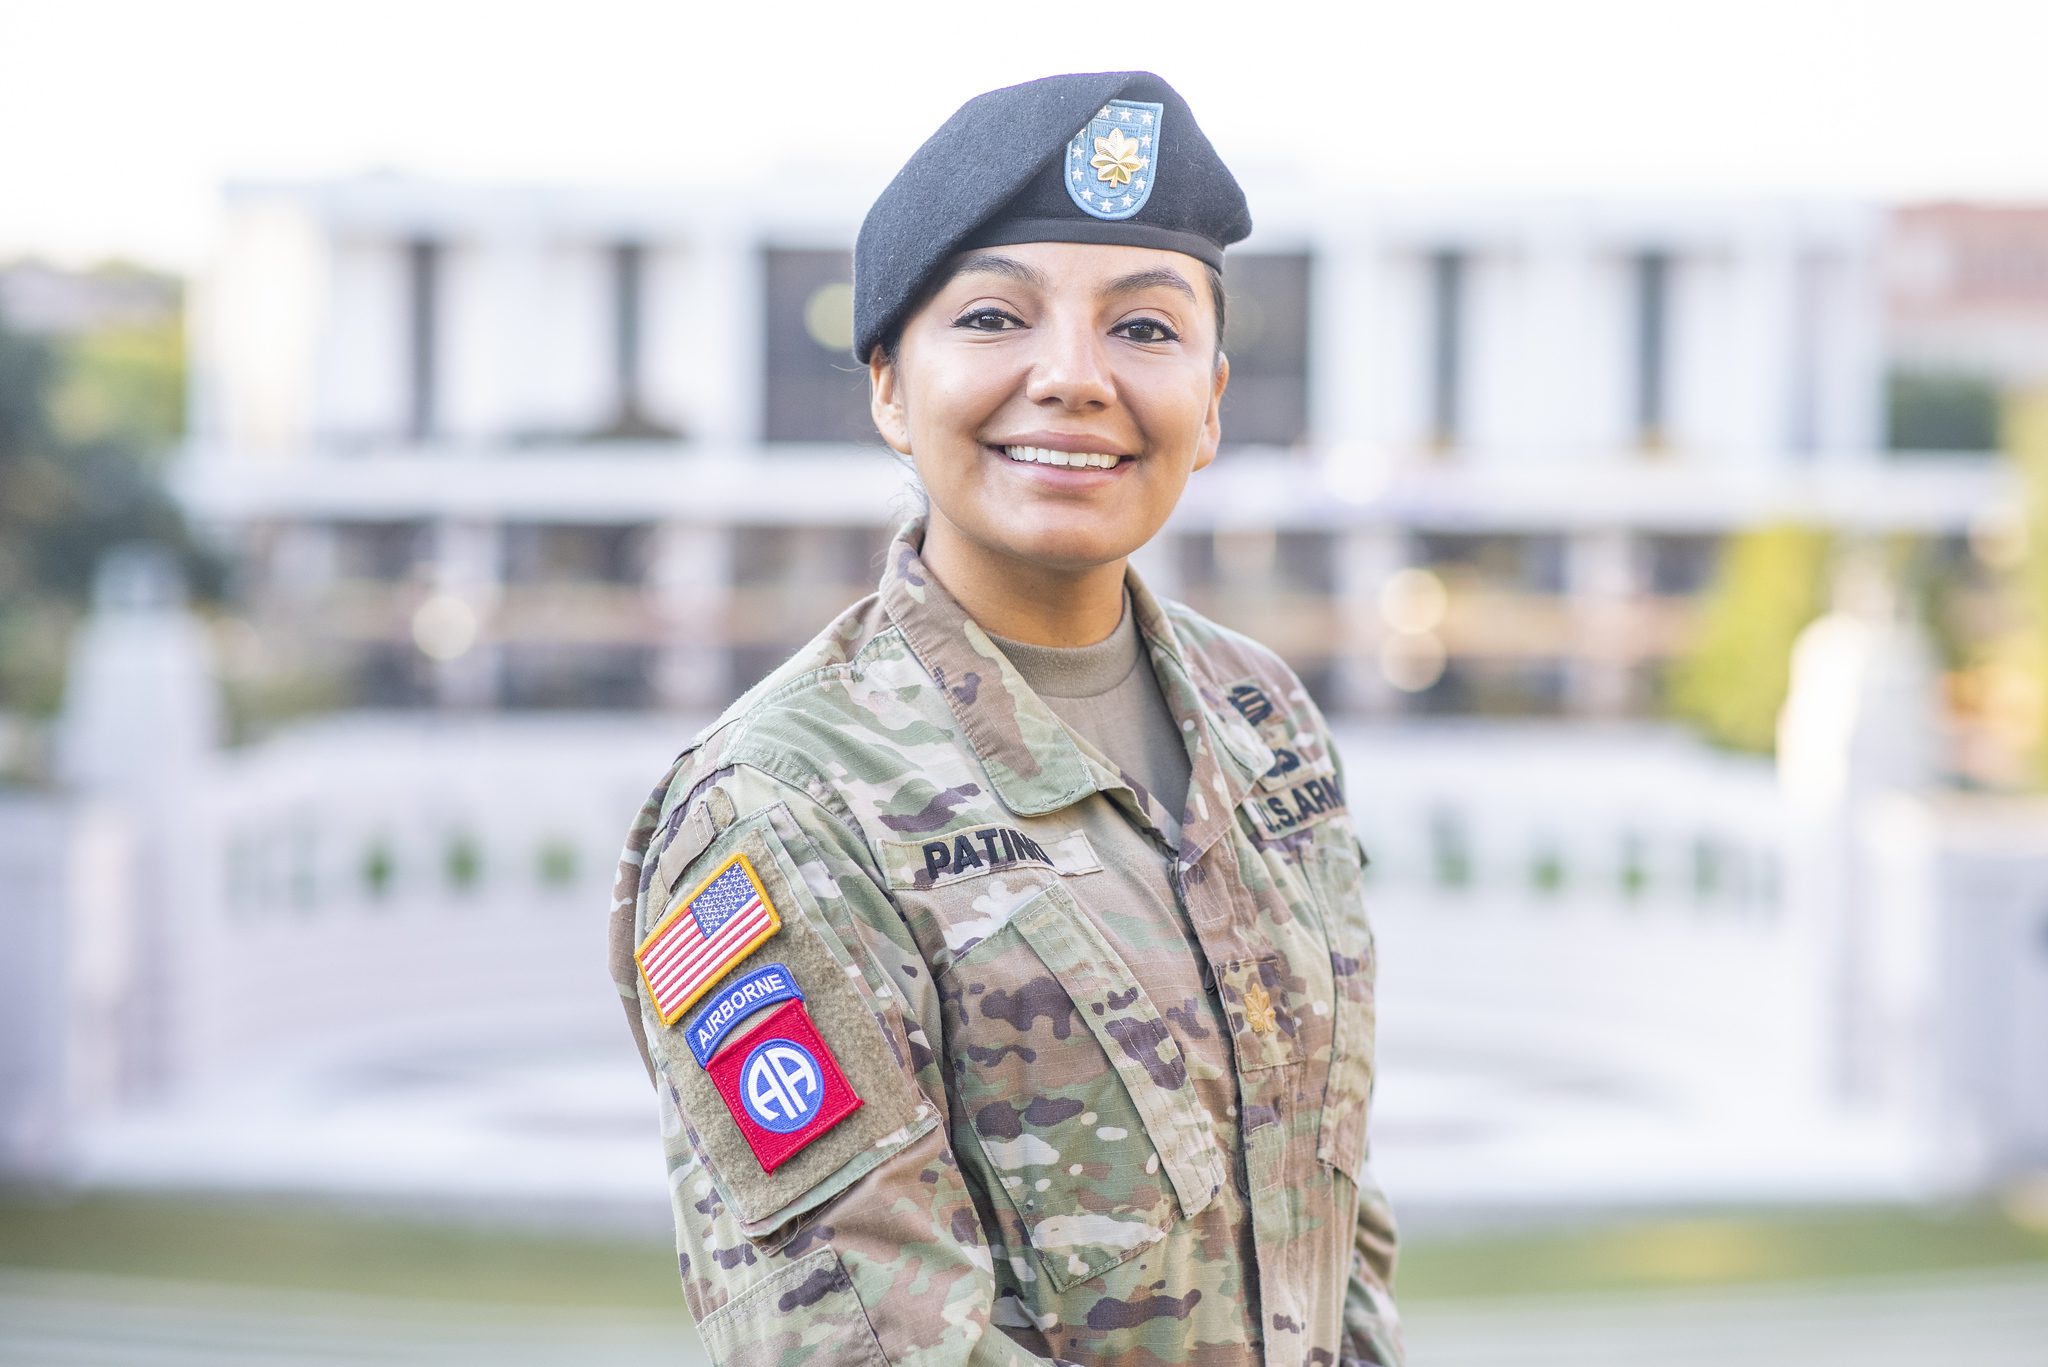 A woman wearing a U.S. Army uniform poses in front of the amphitheater at Clemson University.